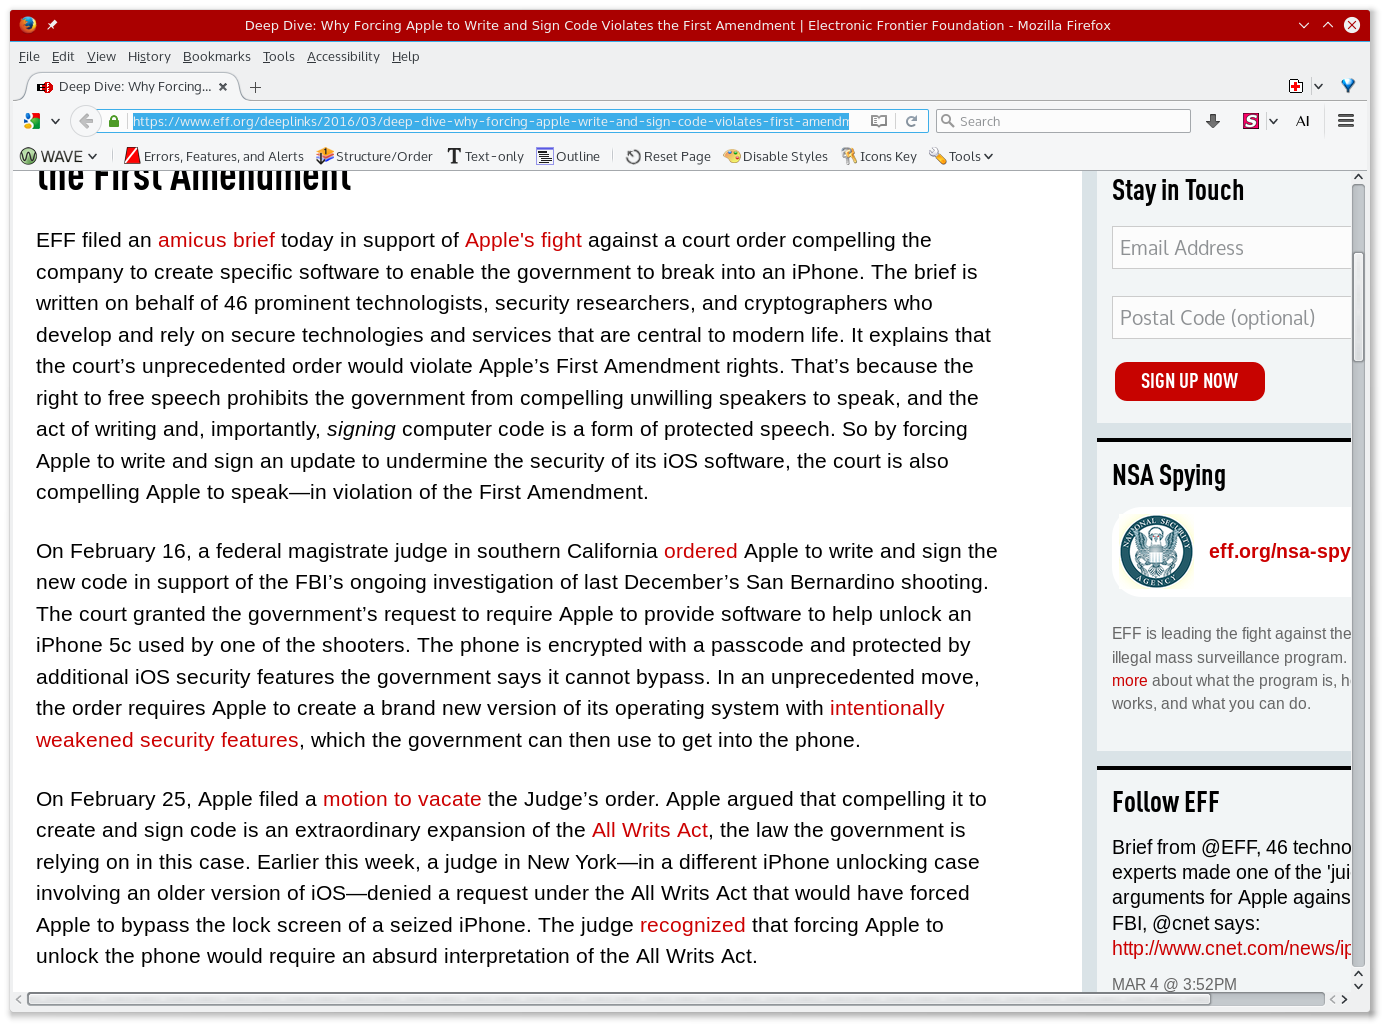 screenshot of article with red links in paragraphs, not underlined.